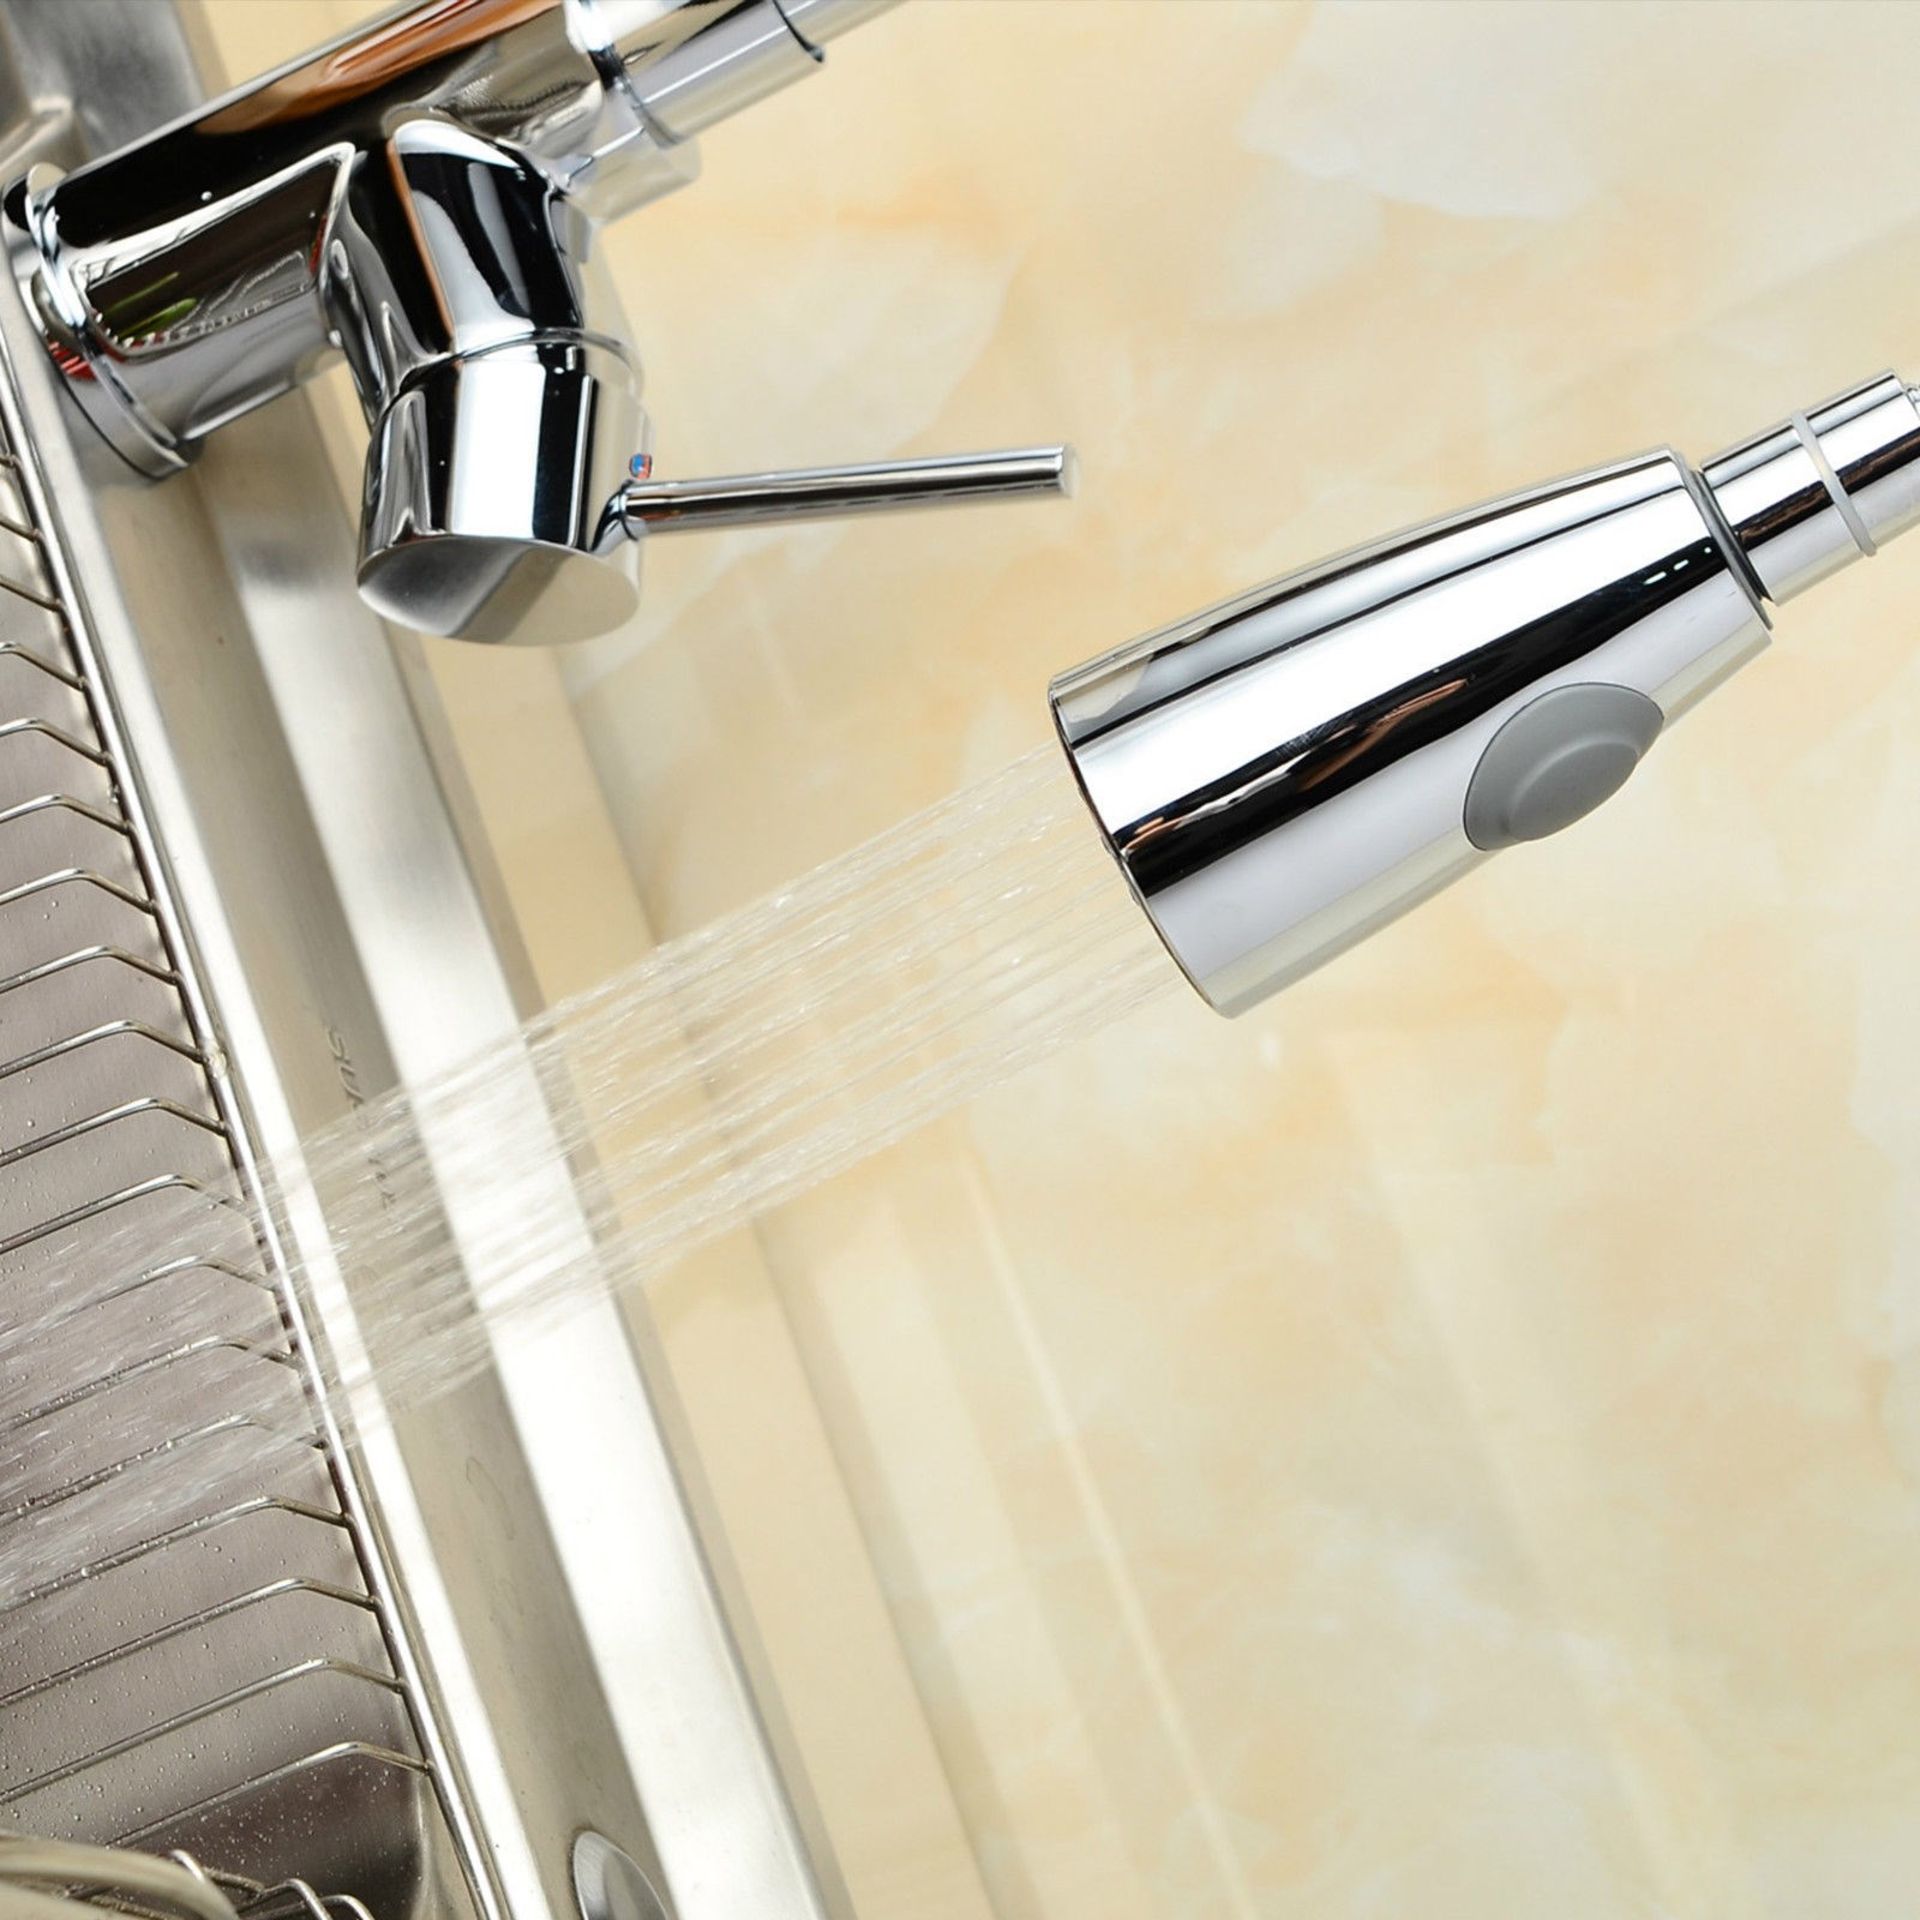 (OS252) Della Modern Monobloc Chrome Brass Pull Out Spray Mixer Tap. RRP £299.99. This tap is from - Image 3 of 4